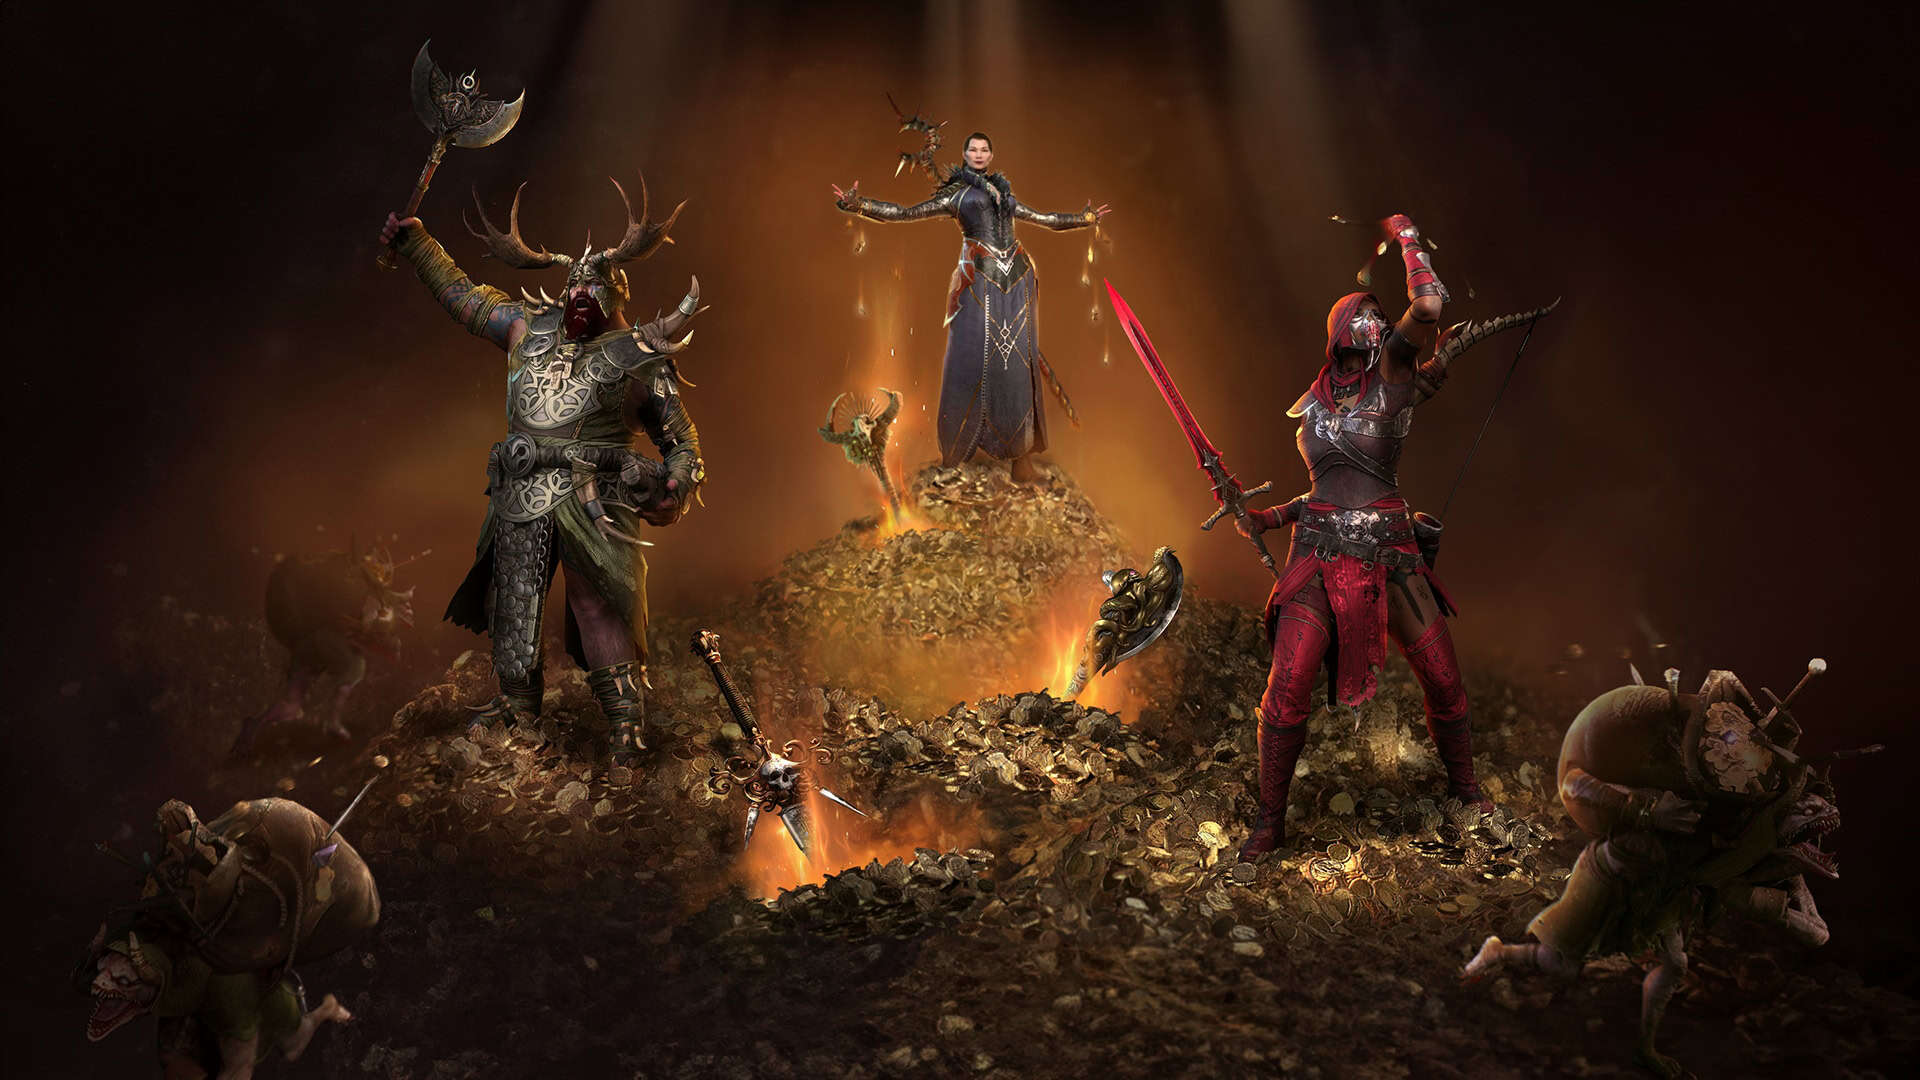 Diablo IV turns one and celebrates with in-game freebies and events